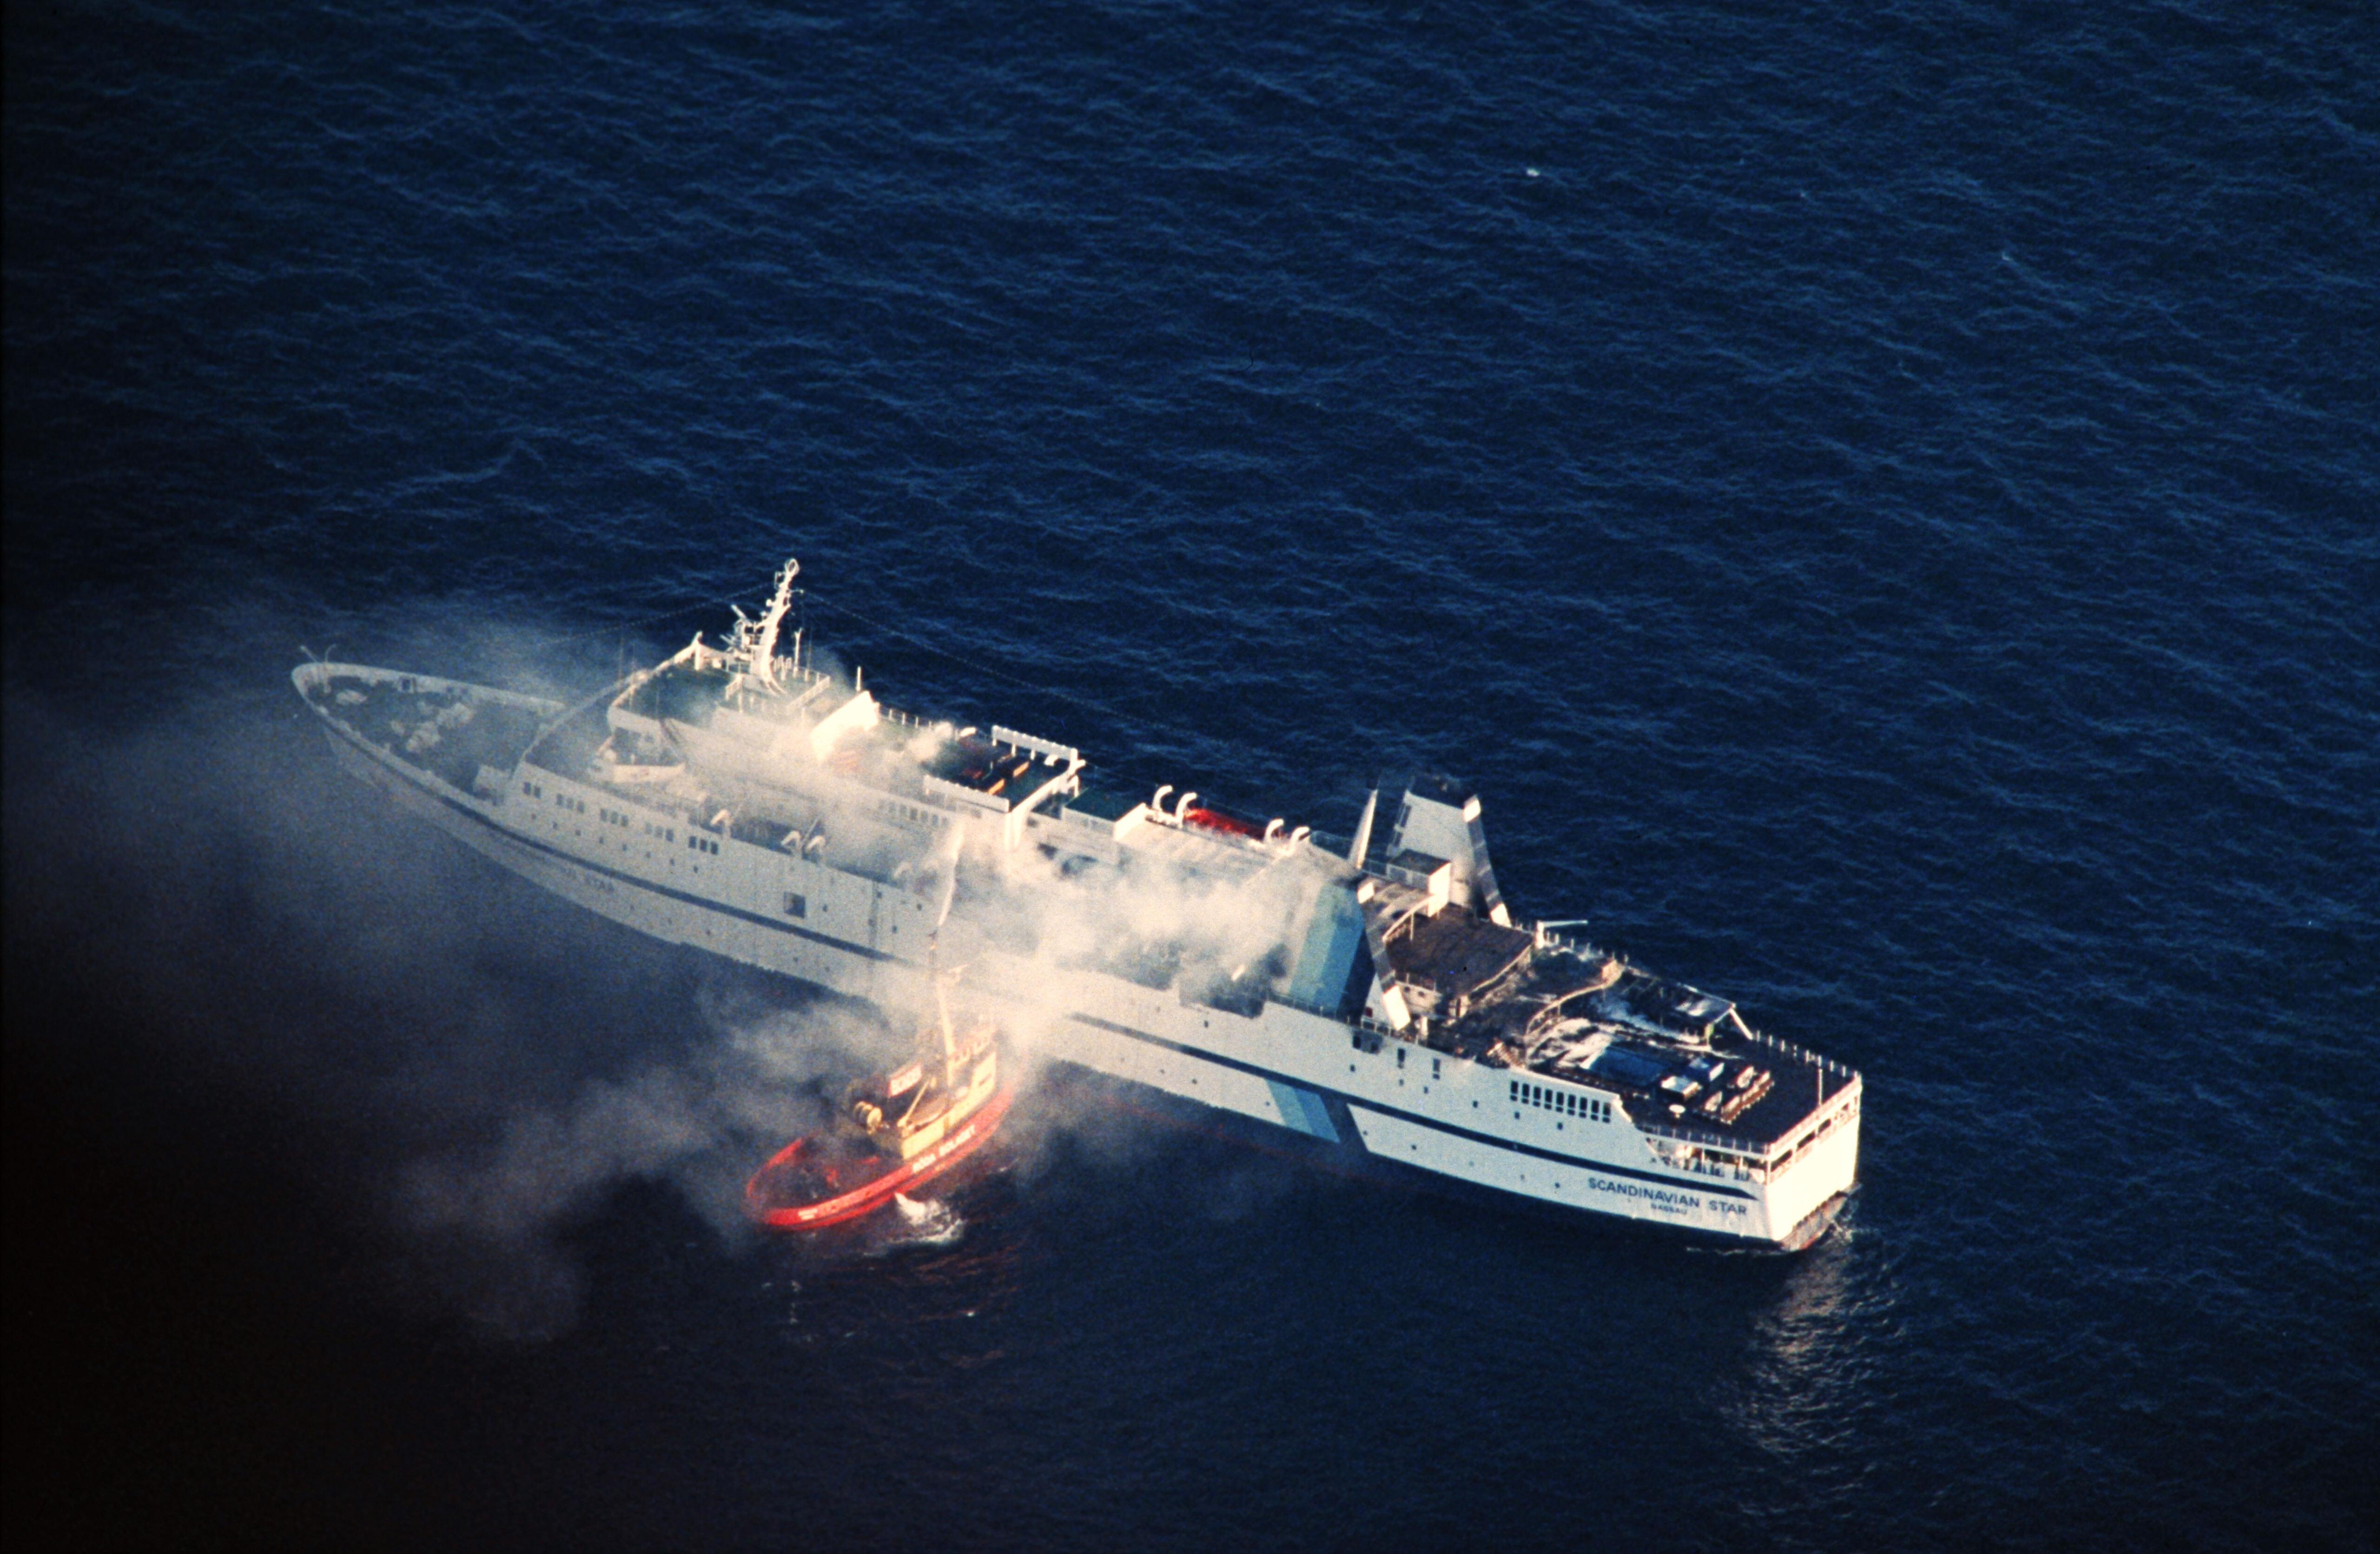 In this picture taken on April 8, 1990 clouds of smoke pour from the ferry Scandanavian Star as firefighters attempt to douse the blaze in Lysekil a day after it was hit by a fire on the North Sea which killed 159 people. The Scandinavian Star car and passenger ferry caught fire between Oslo, Norway and Frederikshavn, Denmark in the evening of April 7, 1990, killing 159 people.
Foto Per Løchen / NTB